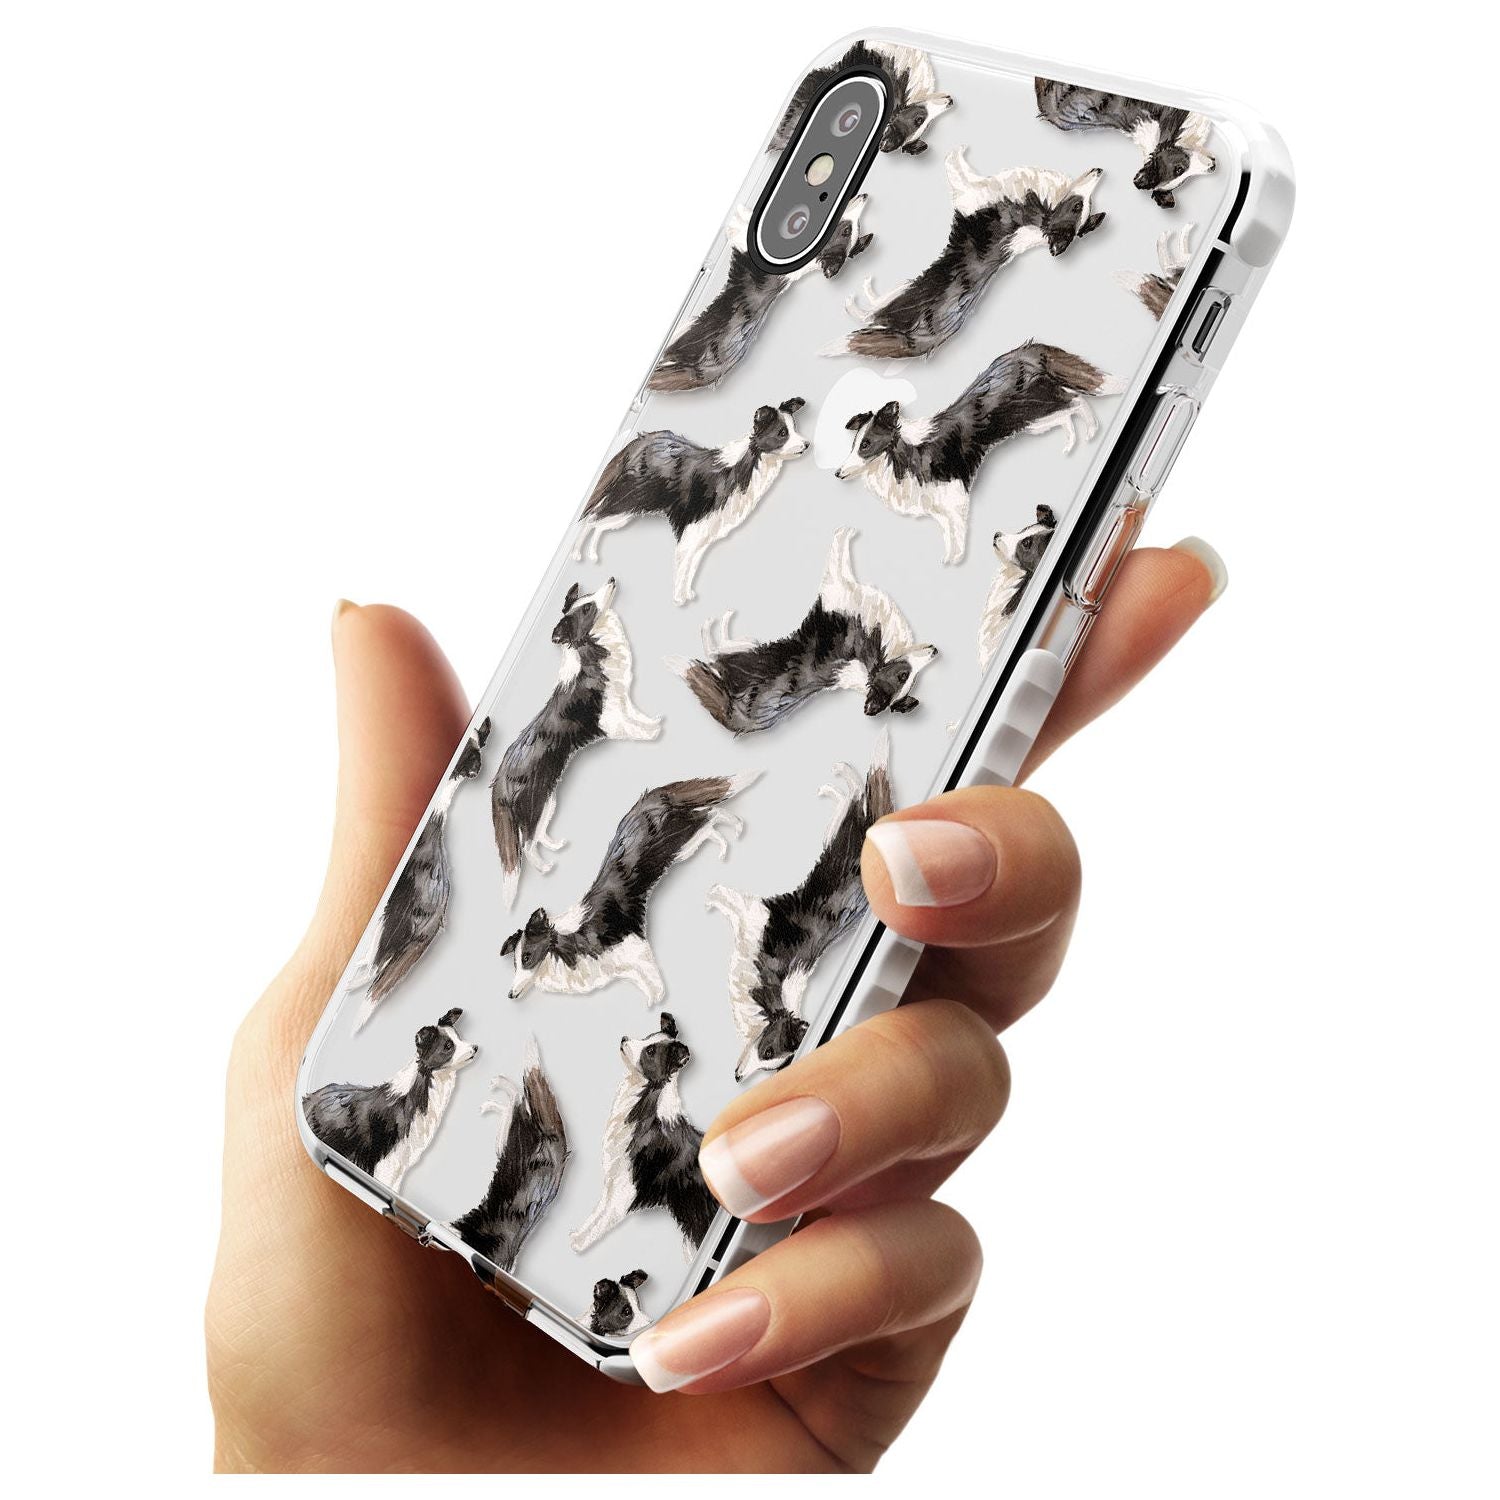 Border Collie Watercolour Dog Pattern Impact Phone Case for iPhone X XS Max XR